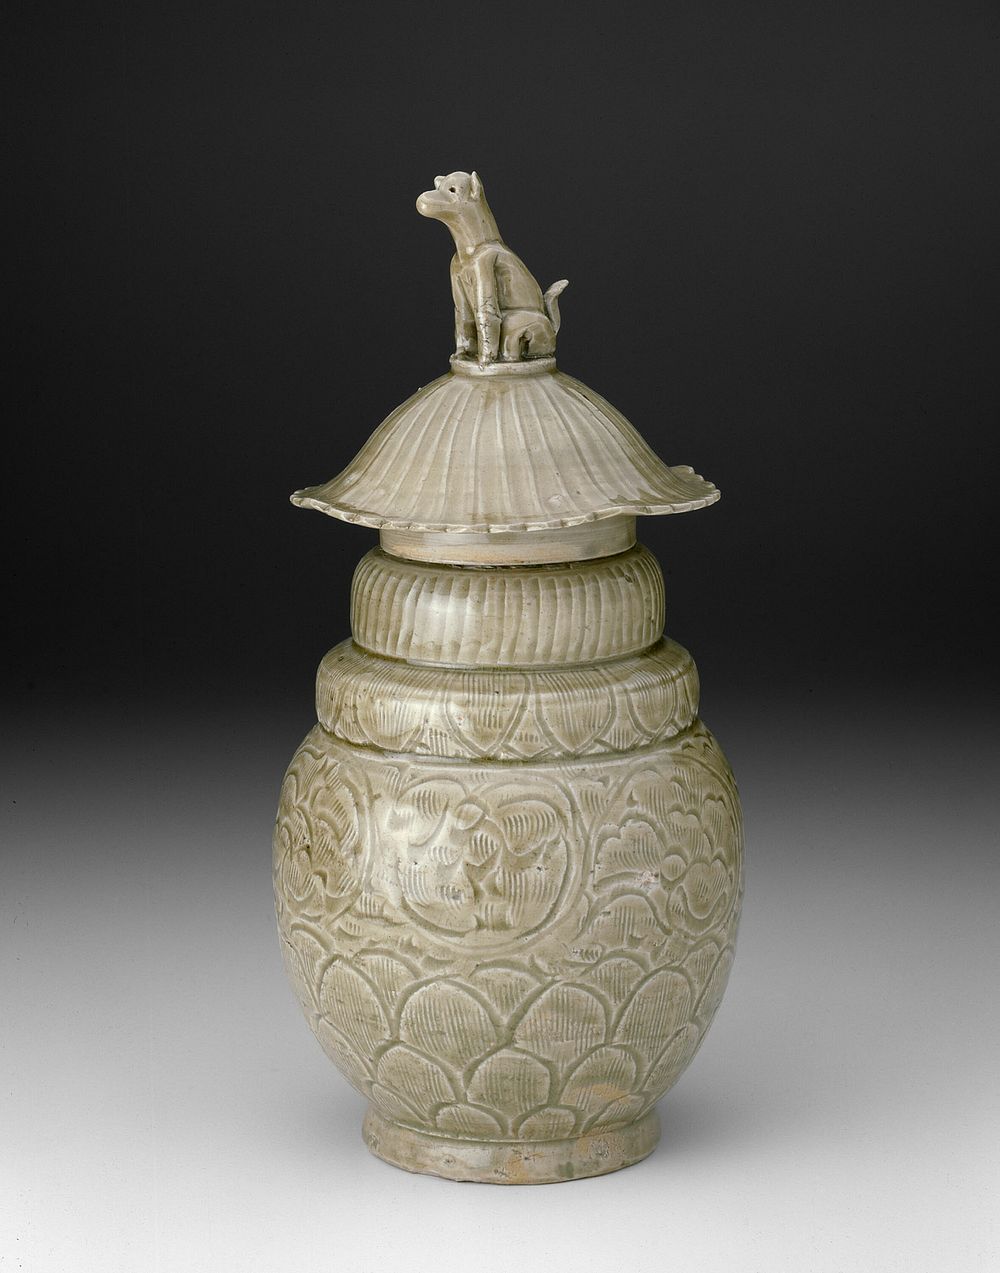 Covered Jar with a Seated Dog